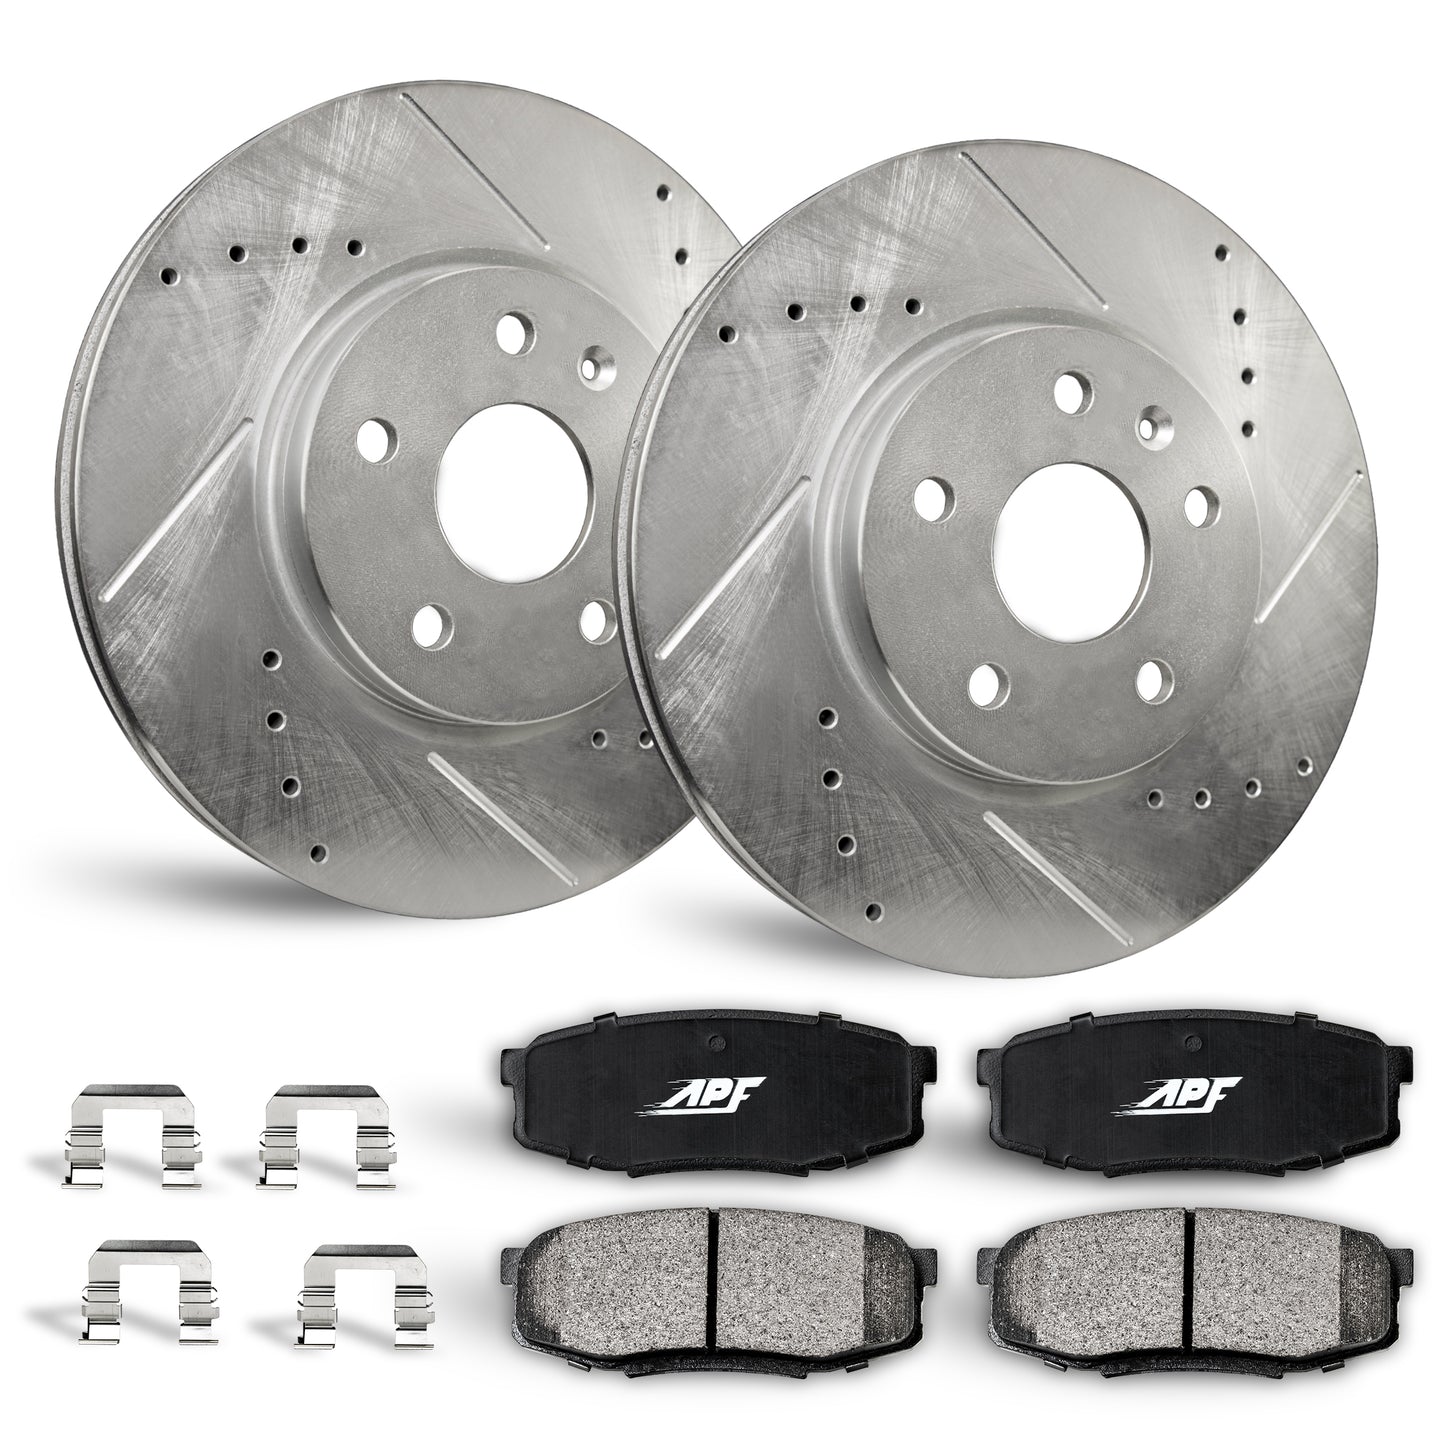 APF Rear Brake Kit compatible with Toyota Camry 1995-1996 | Zinc Drilled Slotted Rotors with Ceramic Carbon Fiber Brake Pads